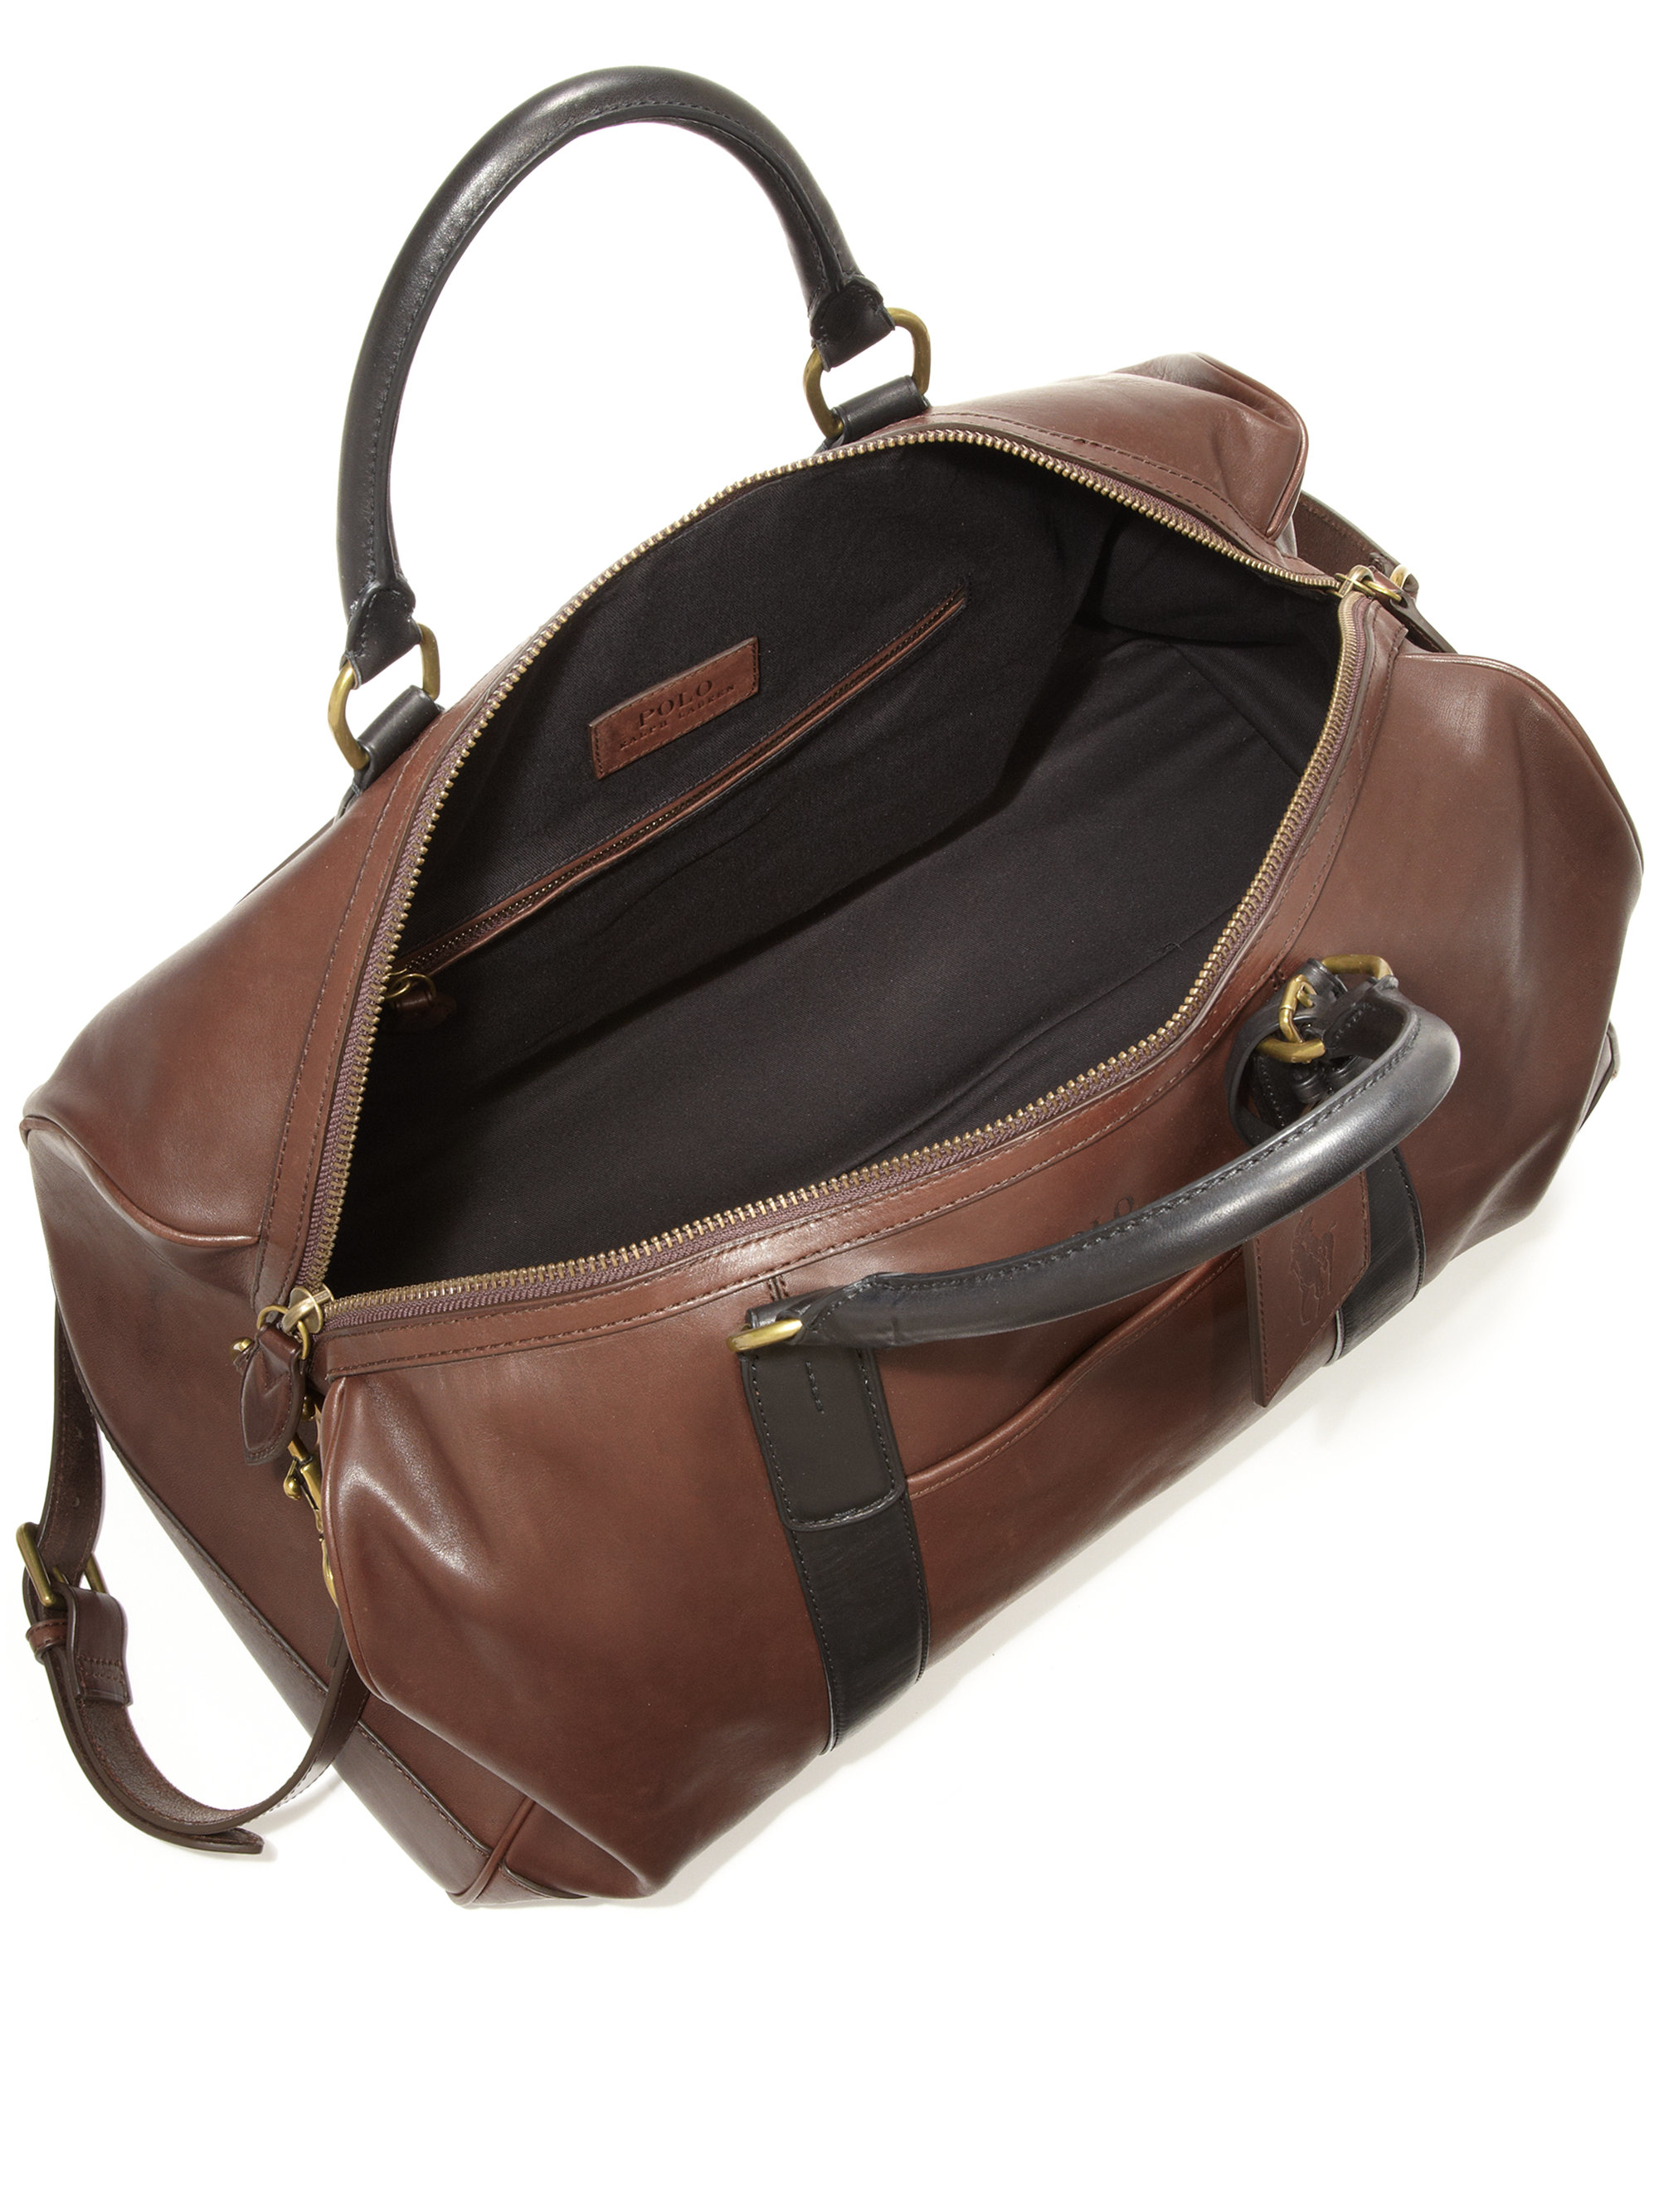 Polo ralph lauren Two-toned Leather Duffel Bag in Brown for Men | Lyst